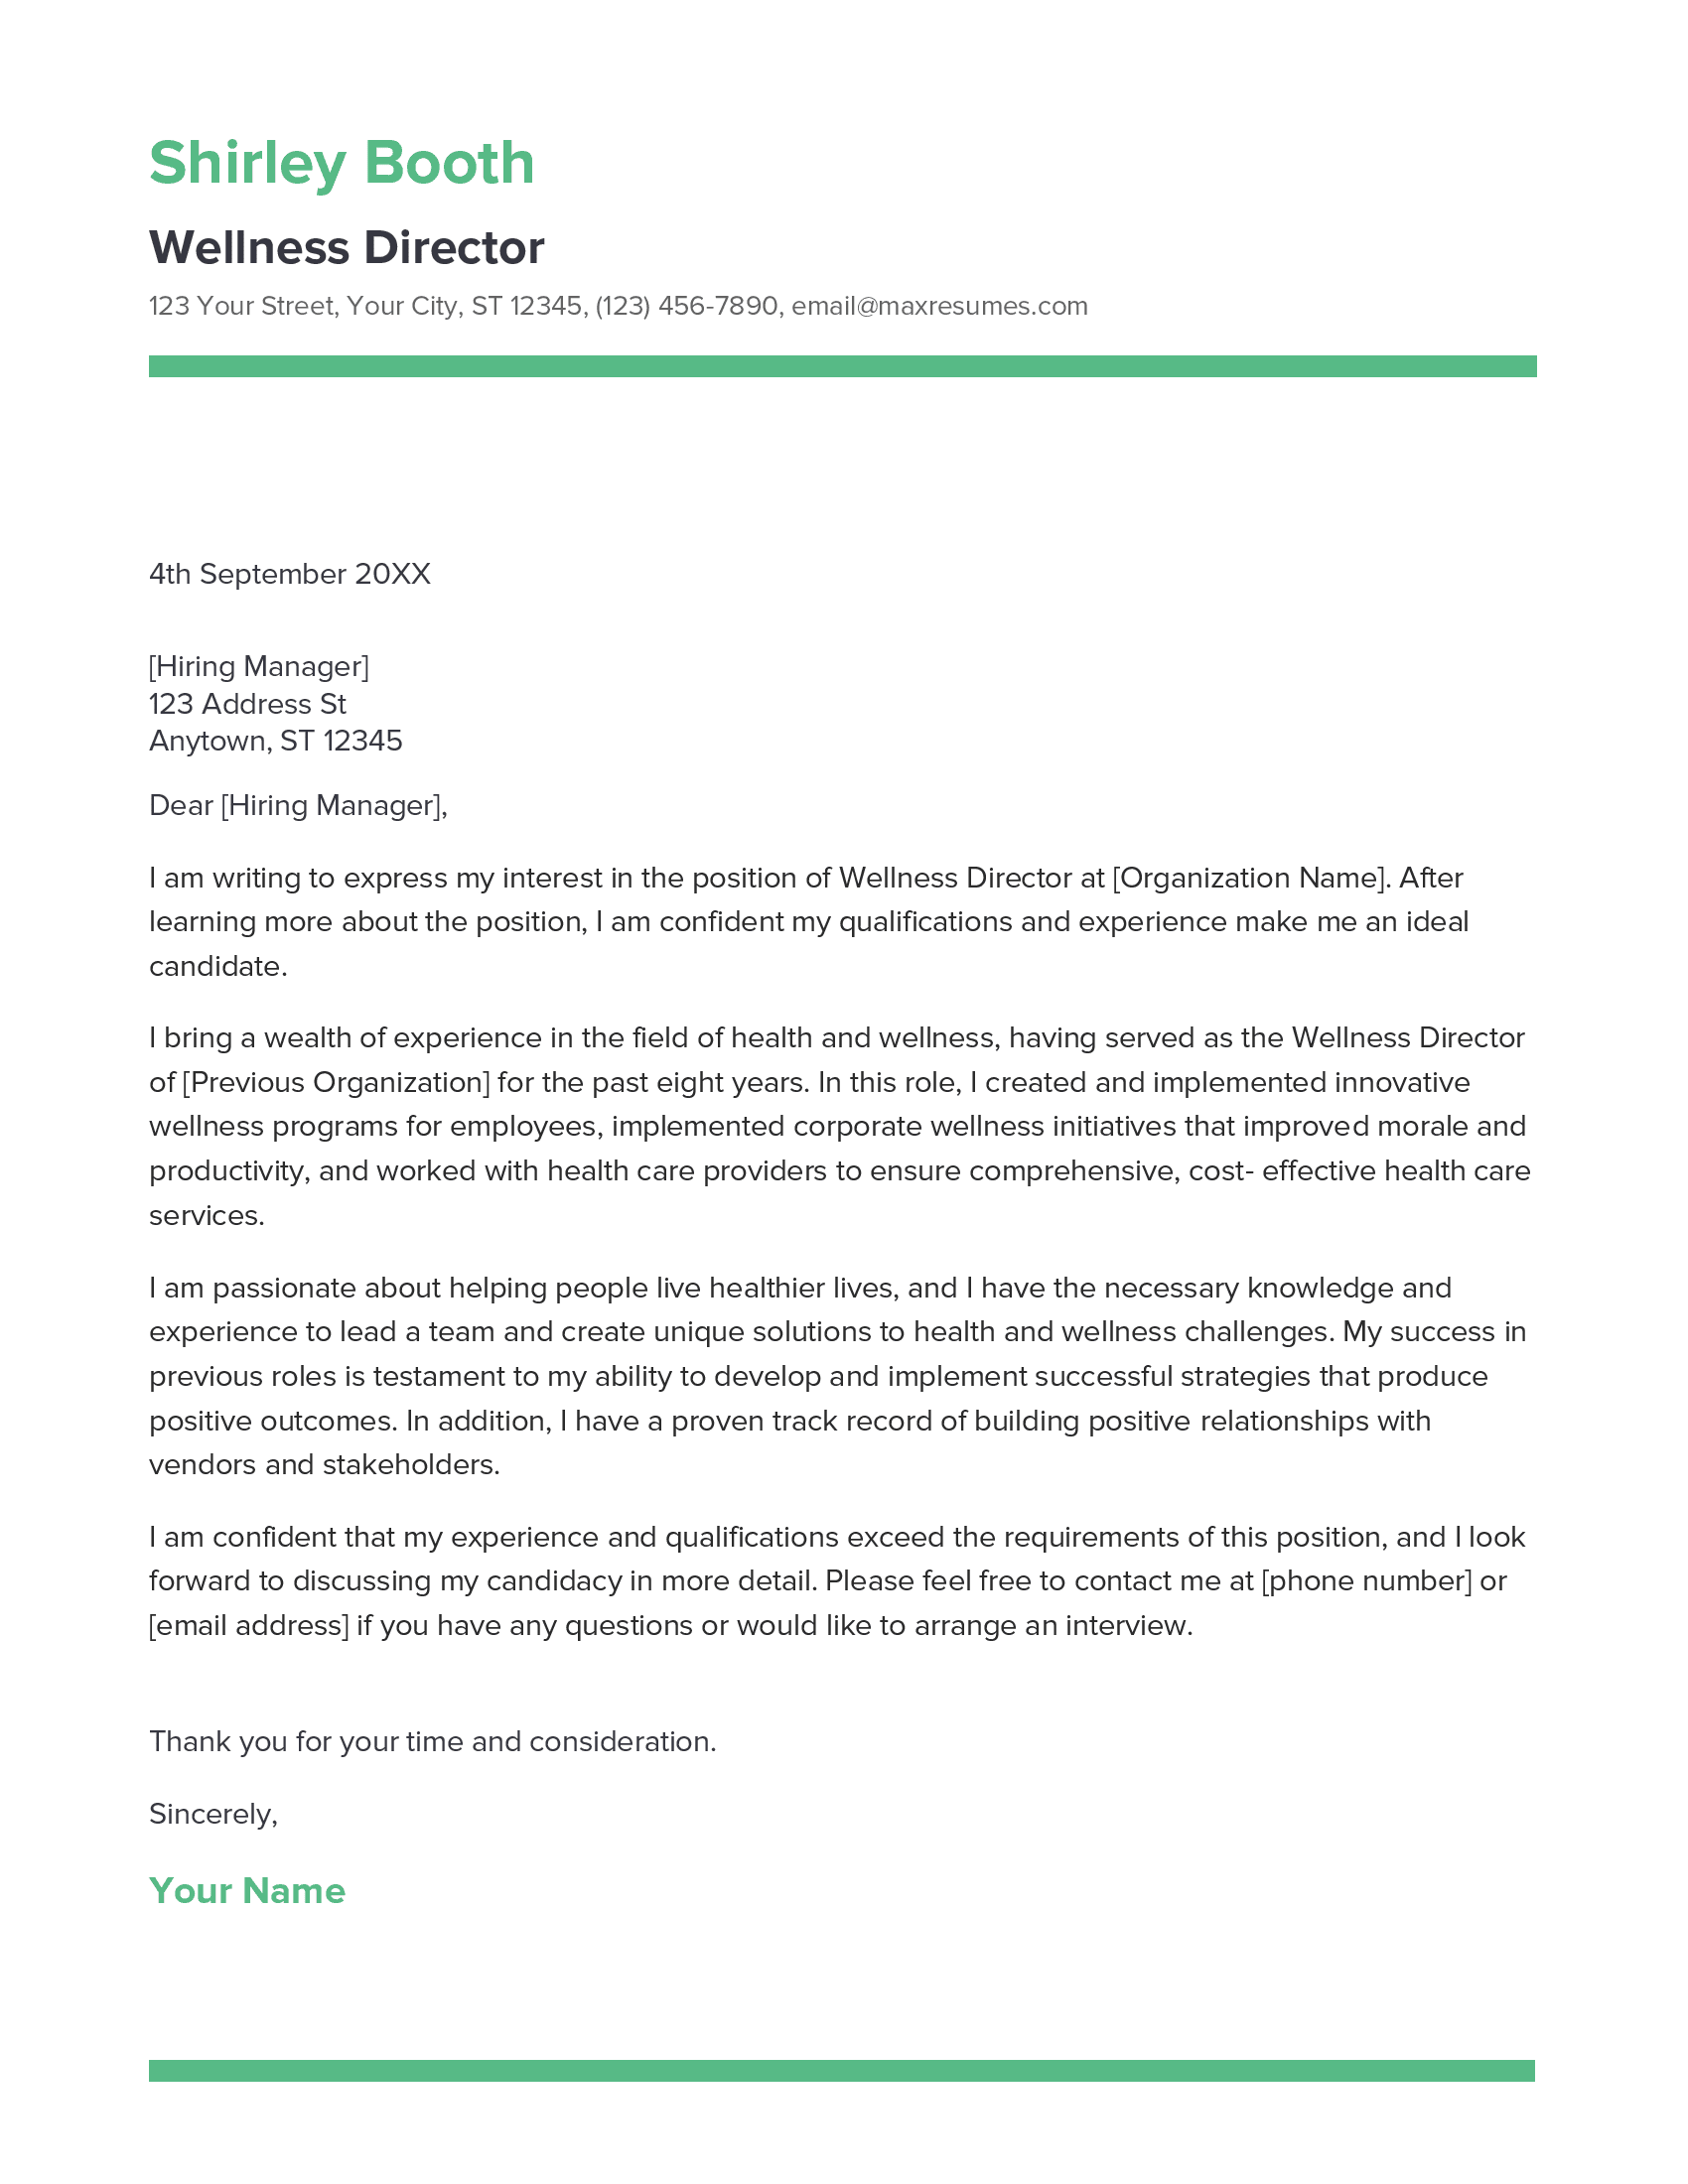 Wellness Director Cover Letter Example